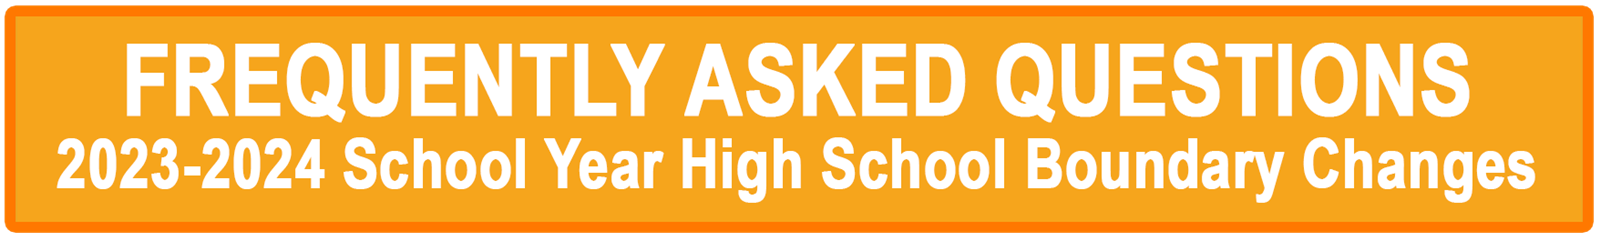 Frequently Asked Questions for the 2023-2024 School Year High School Boundary Changes